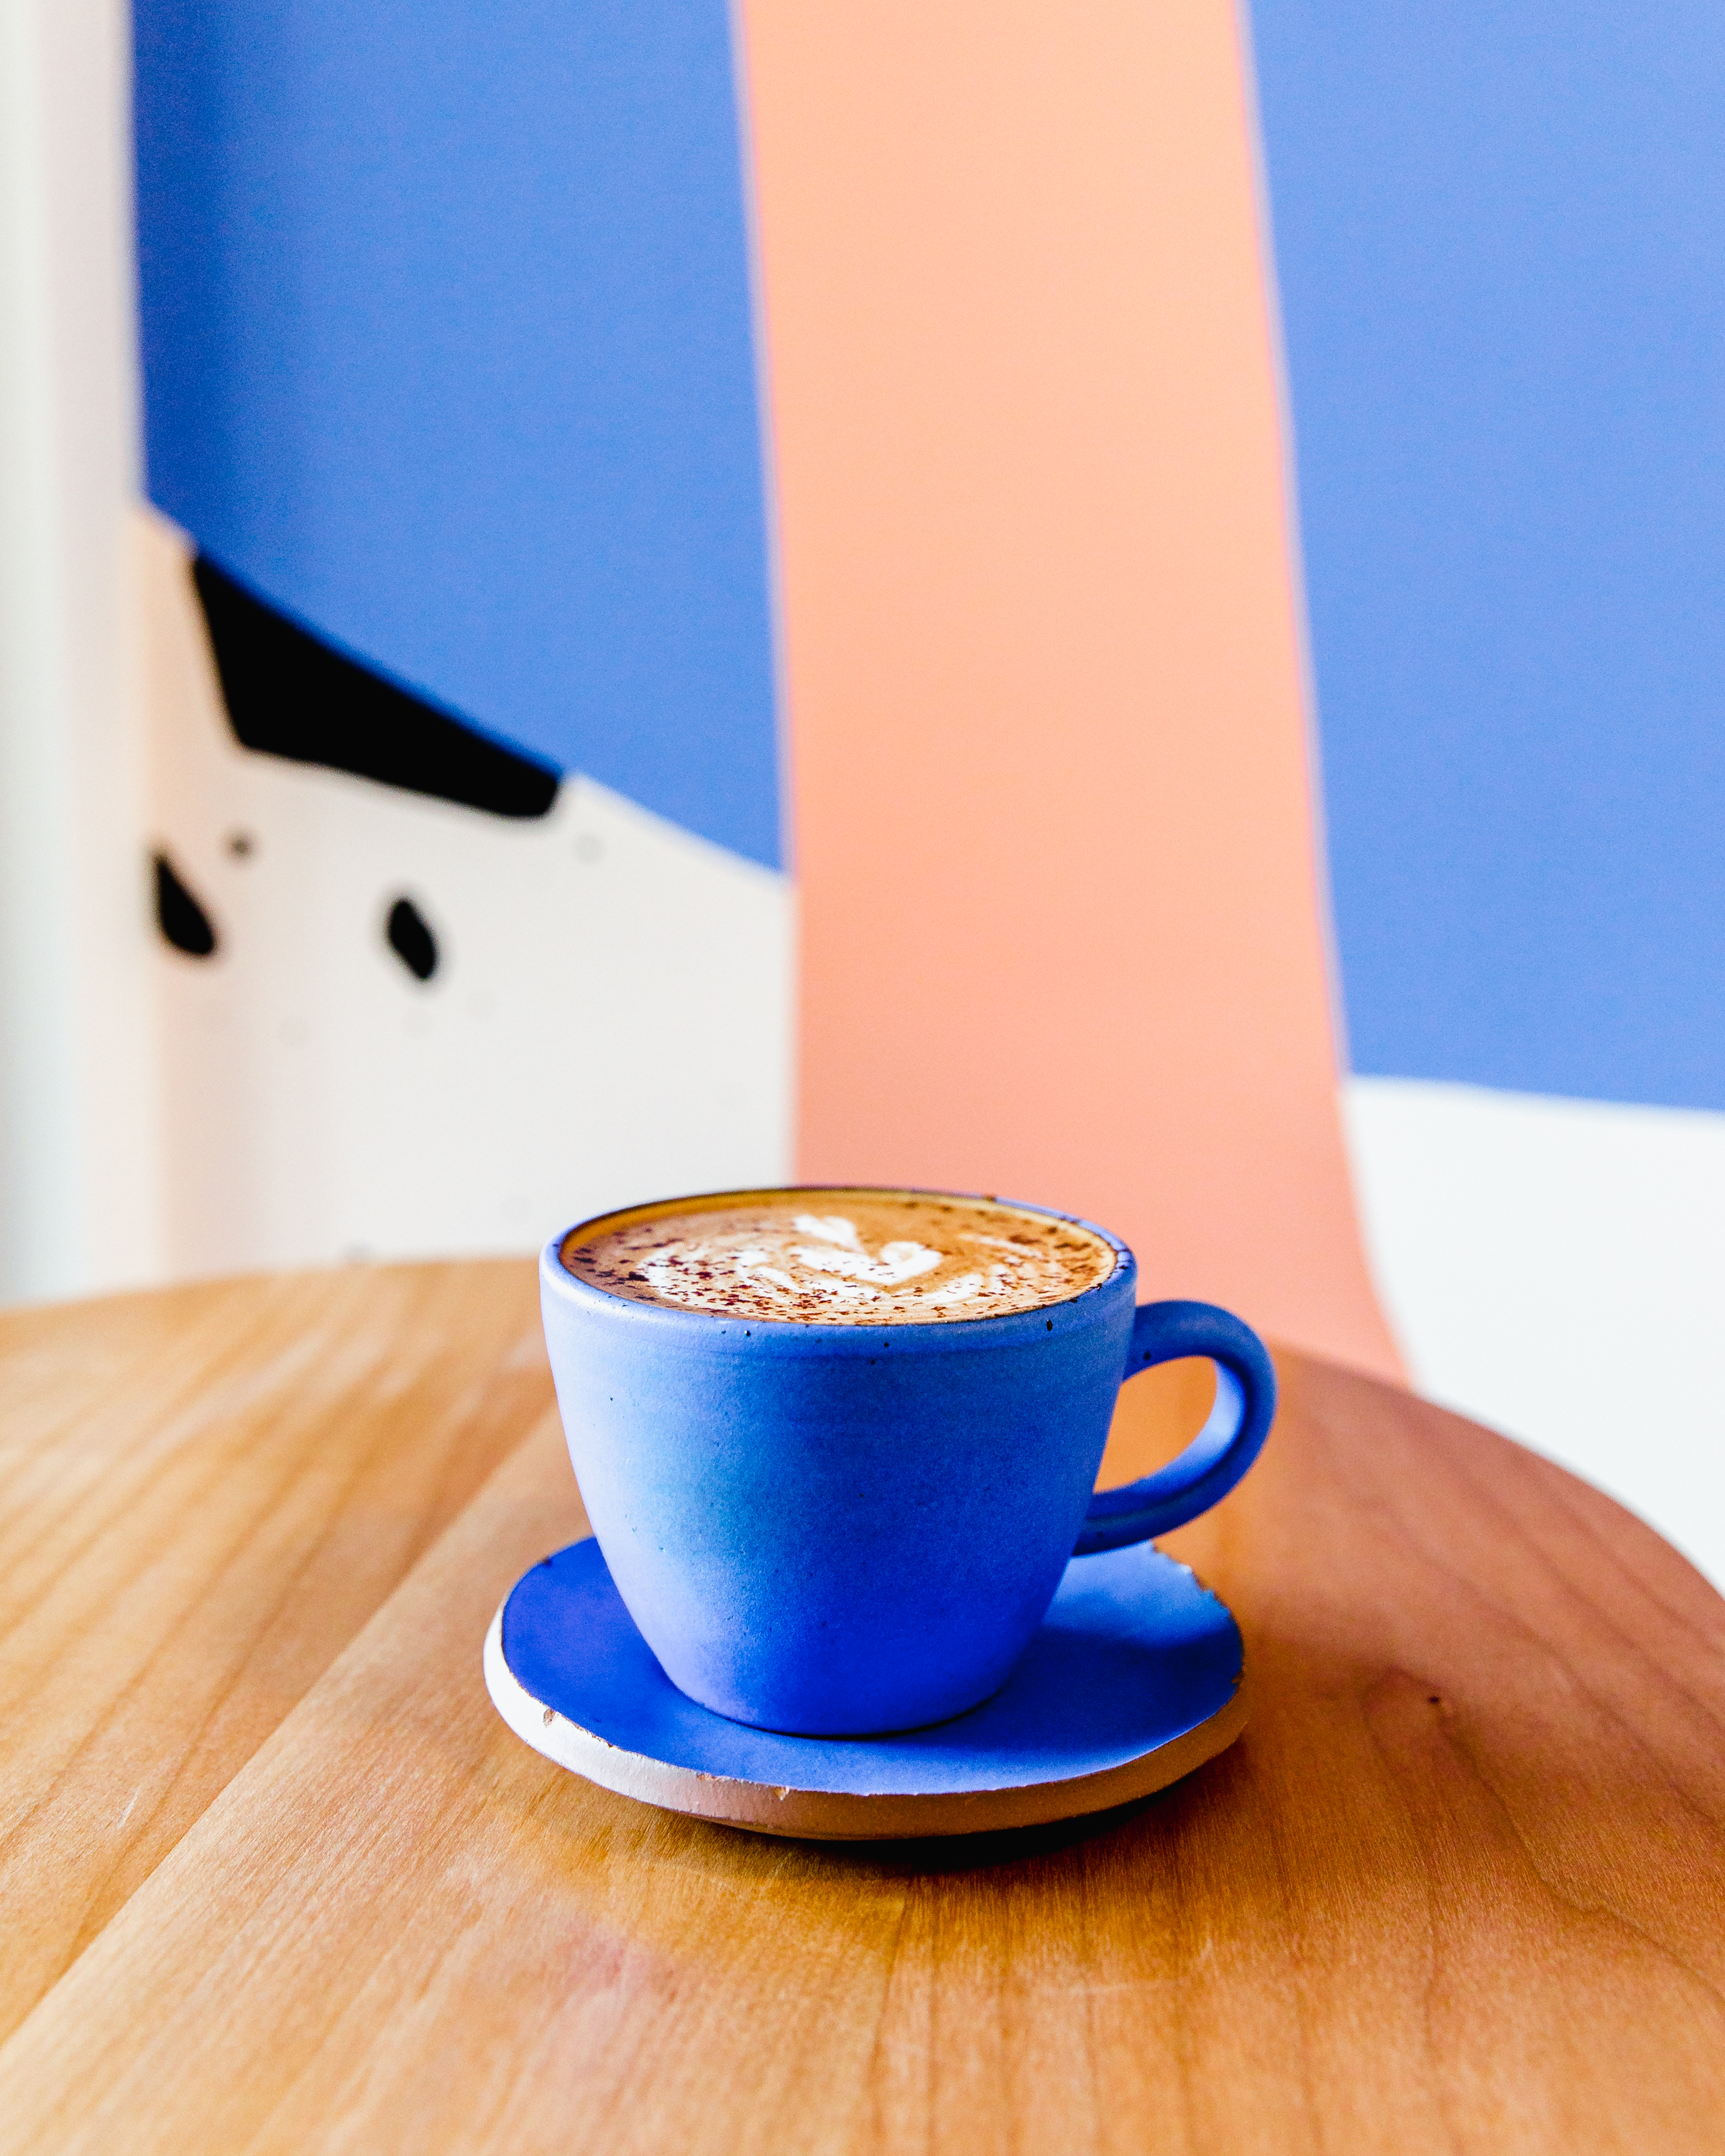 8 Places to Drink Coffee In Portland, OR by Foodie Snitch